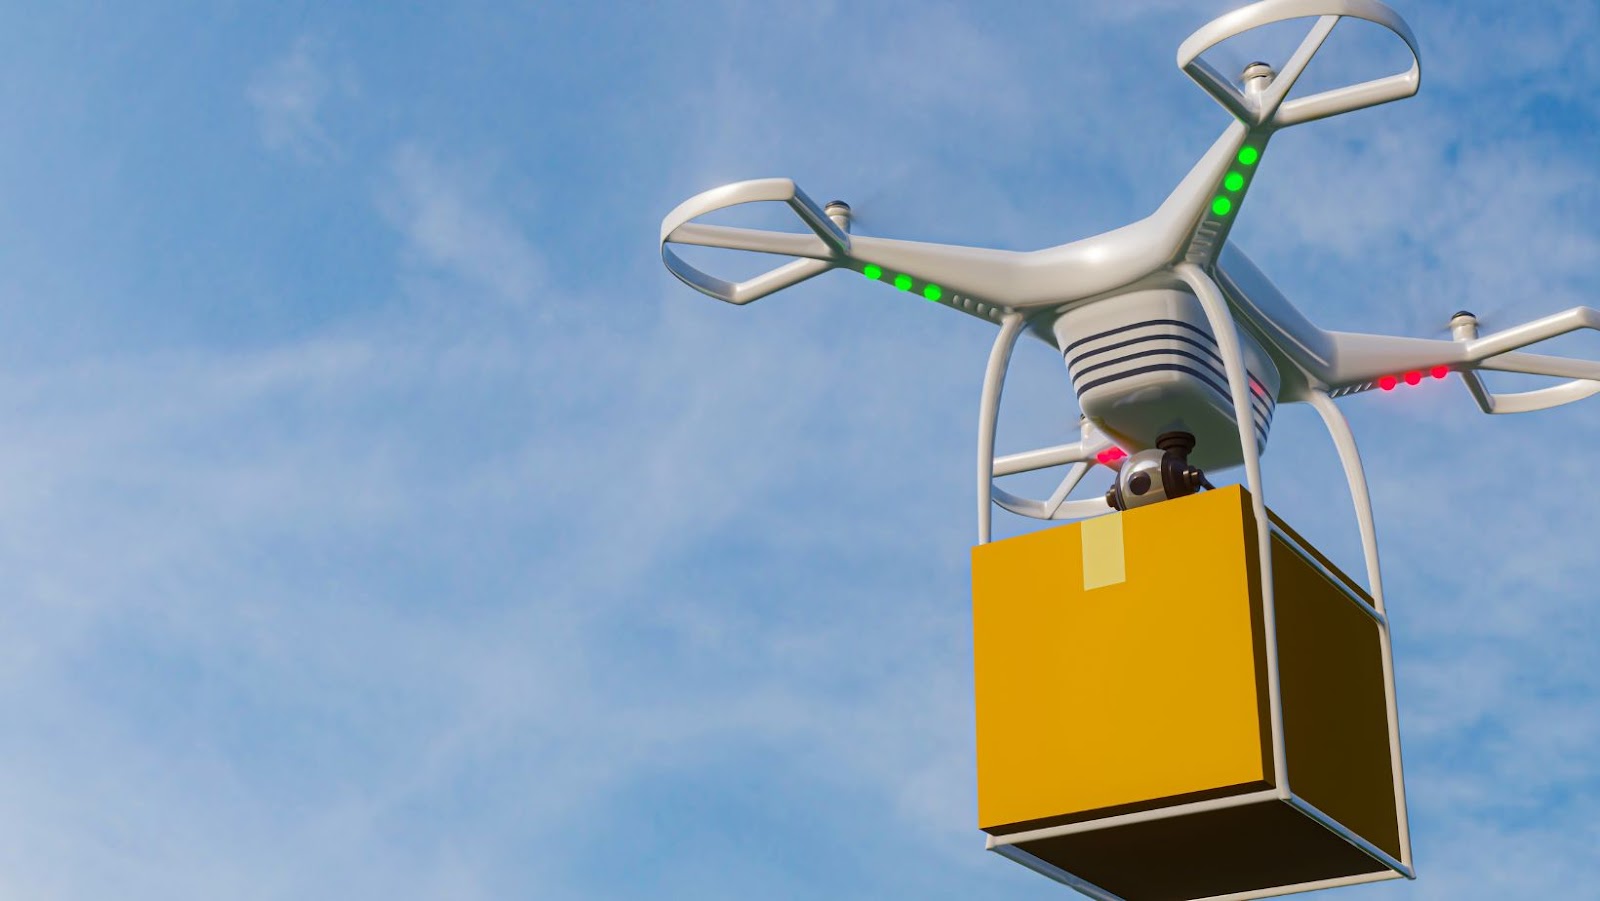 Why Walmart is using drones for delivery